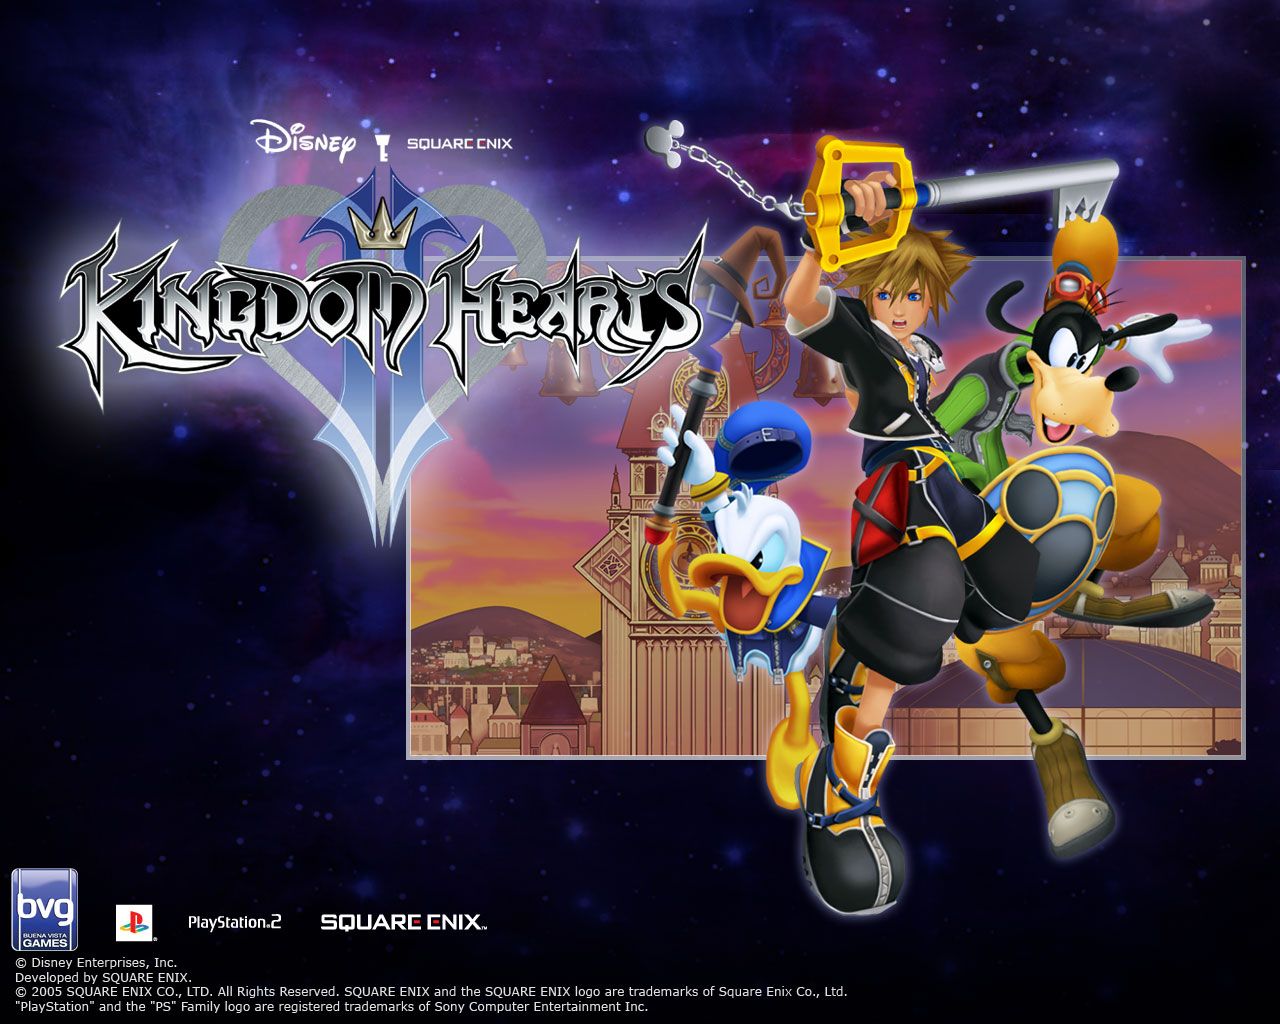 Disney Meets Final Fantasy In This Wallpaper For Kingdom Hearts Ii